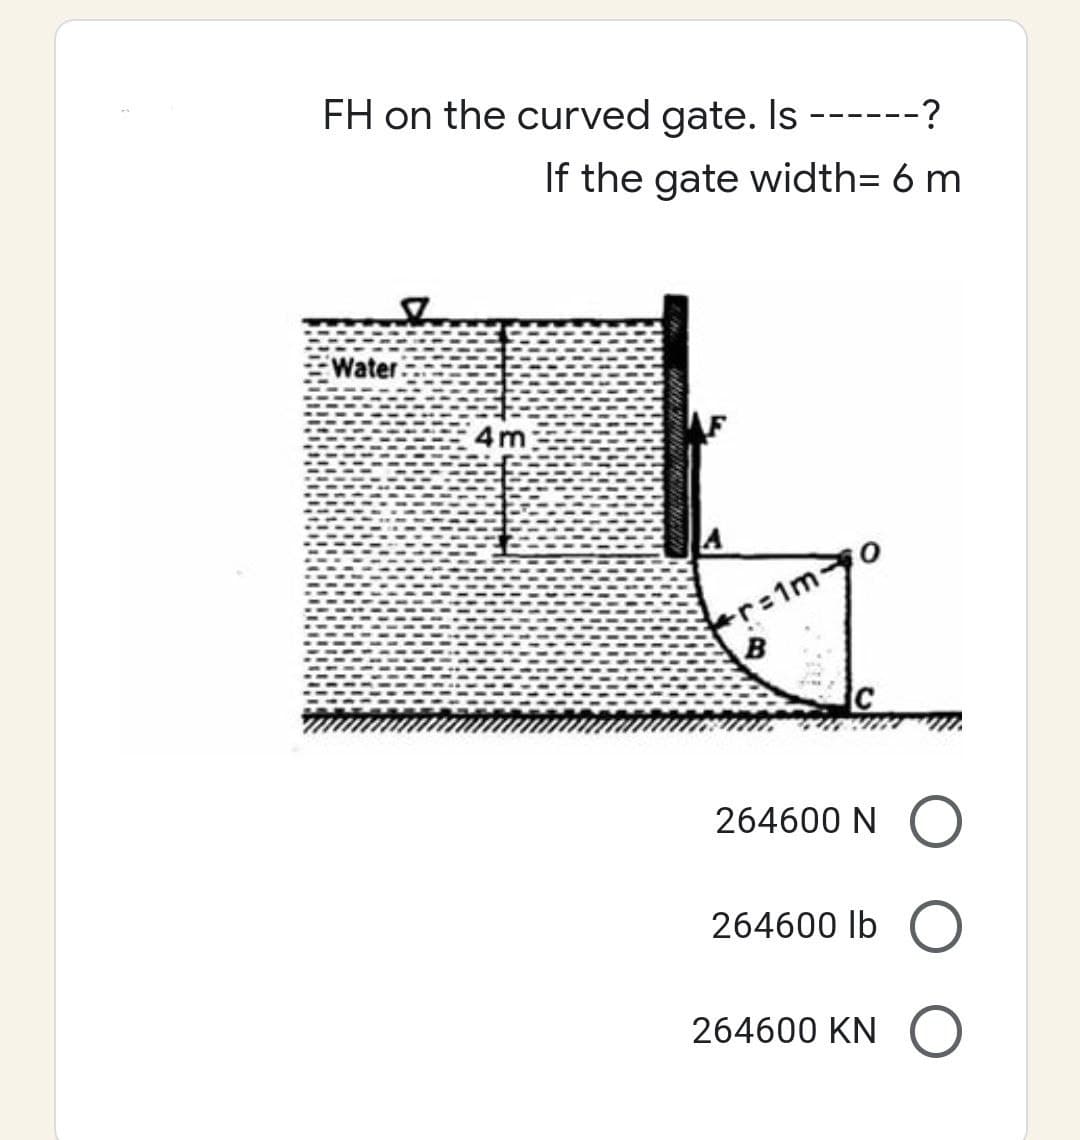 FH on the curved gate. Is
S
Water
4m
·?
If the gate width= 6 m
F
r=1my
B
264600 NO
264600 lb O
264600 KN